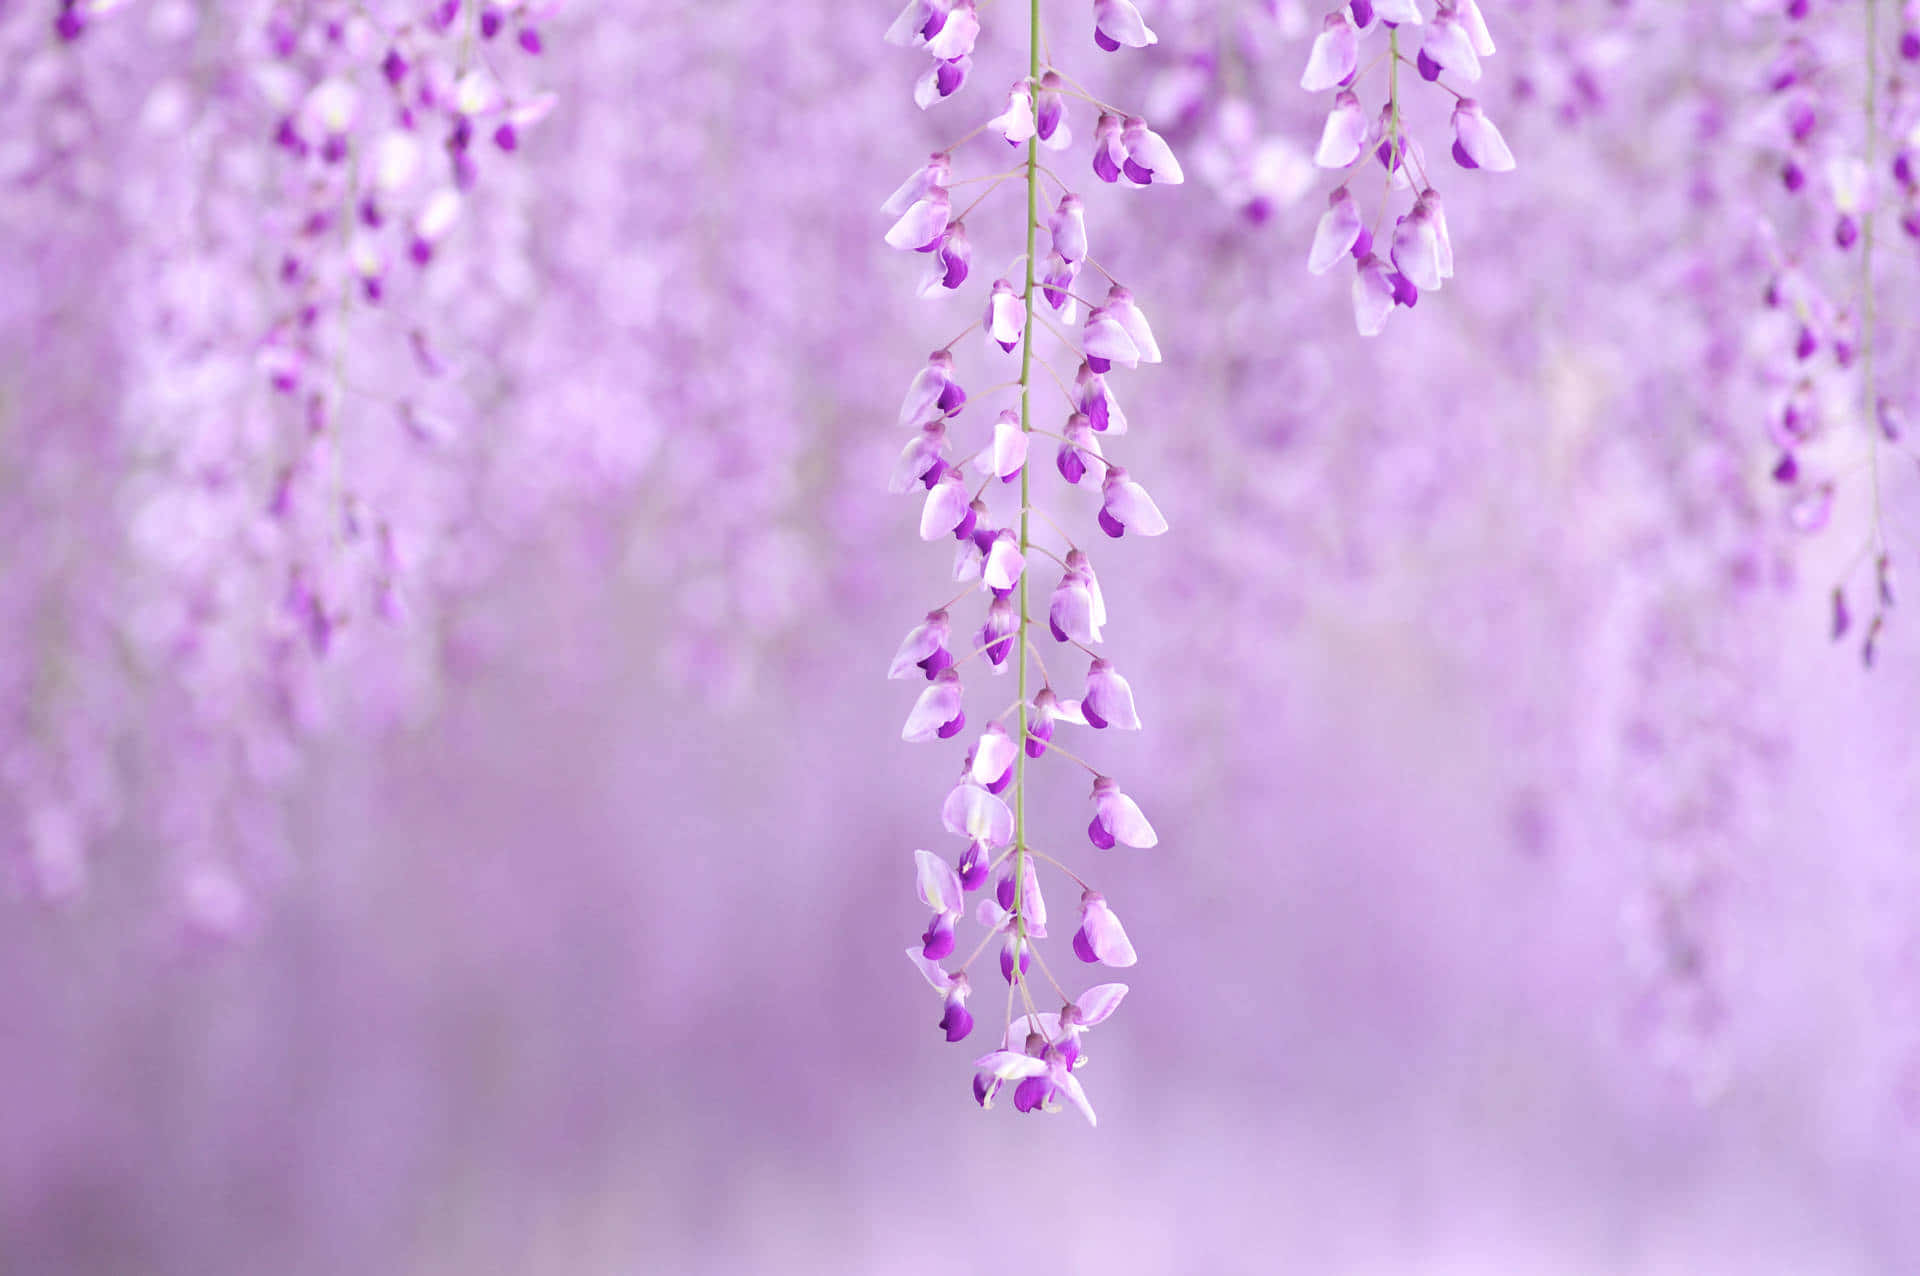 A Purple Wisteria Hanging From A Tree